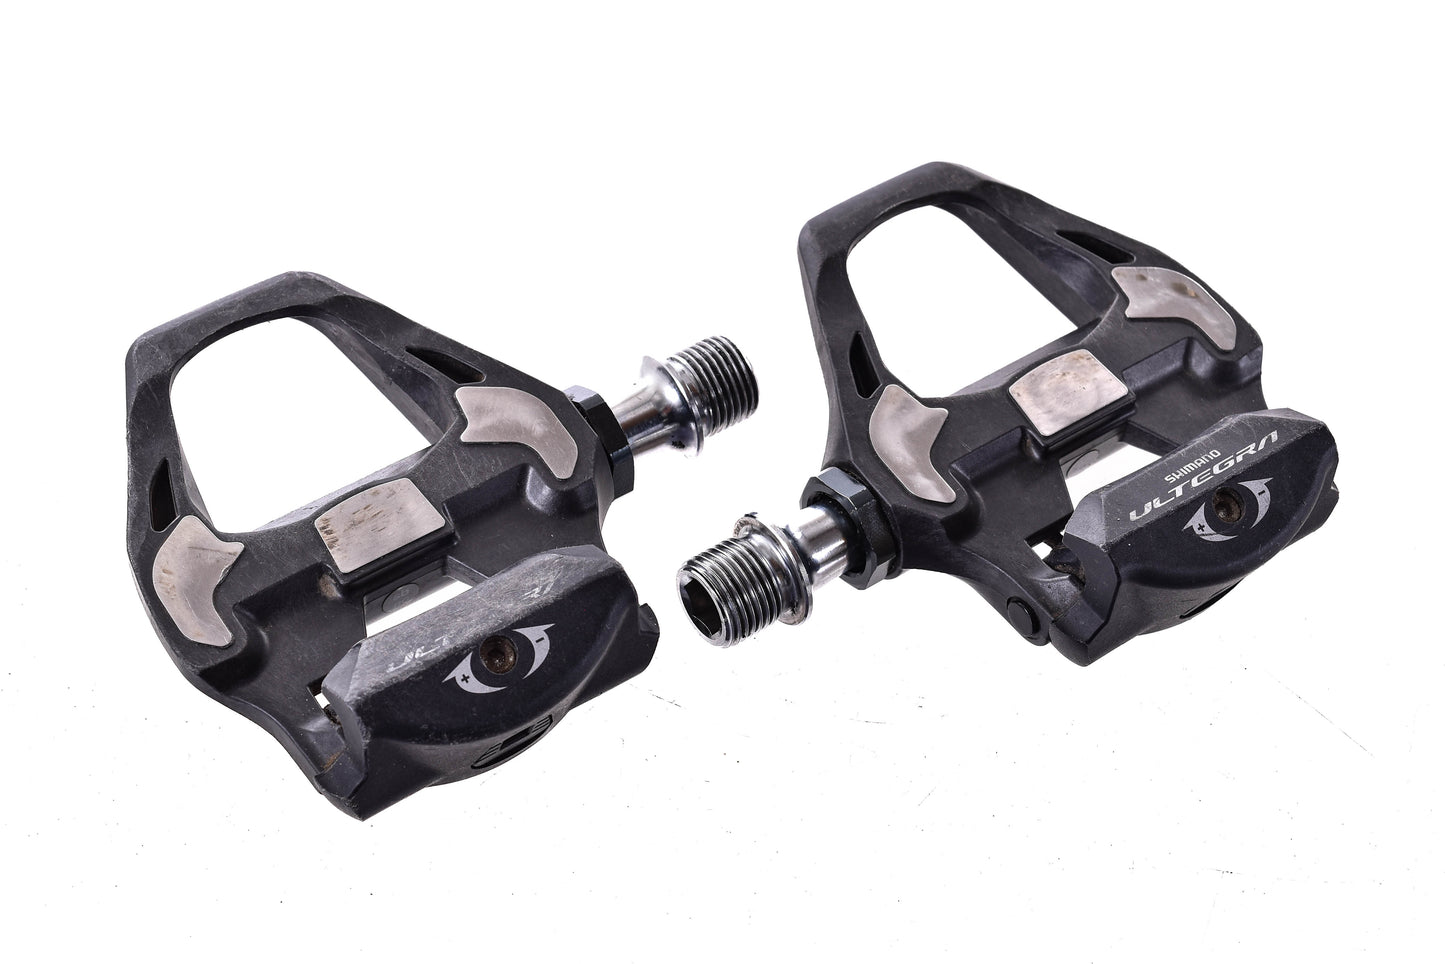 USED Shimano Ultegra PD-R8000 SPD-SL Carbon Road Pedals w/ new Cleats